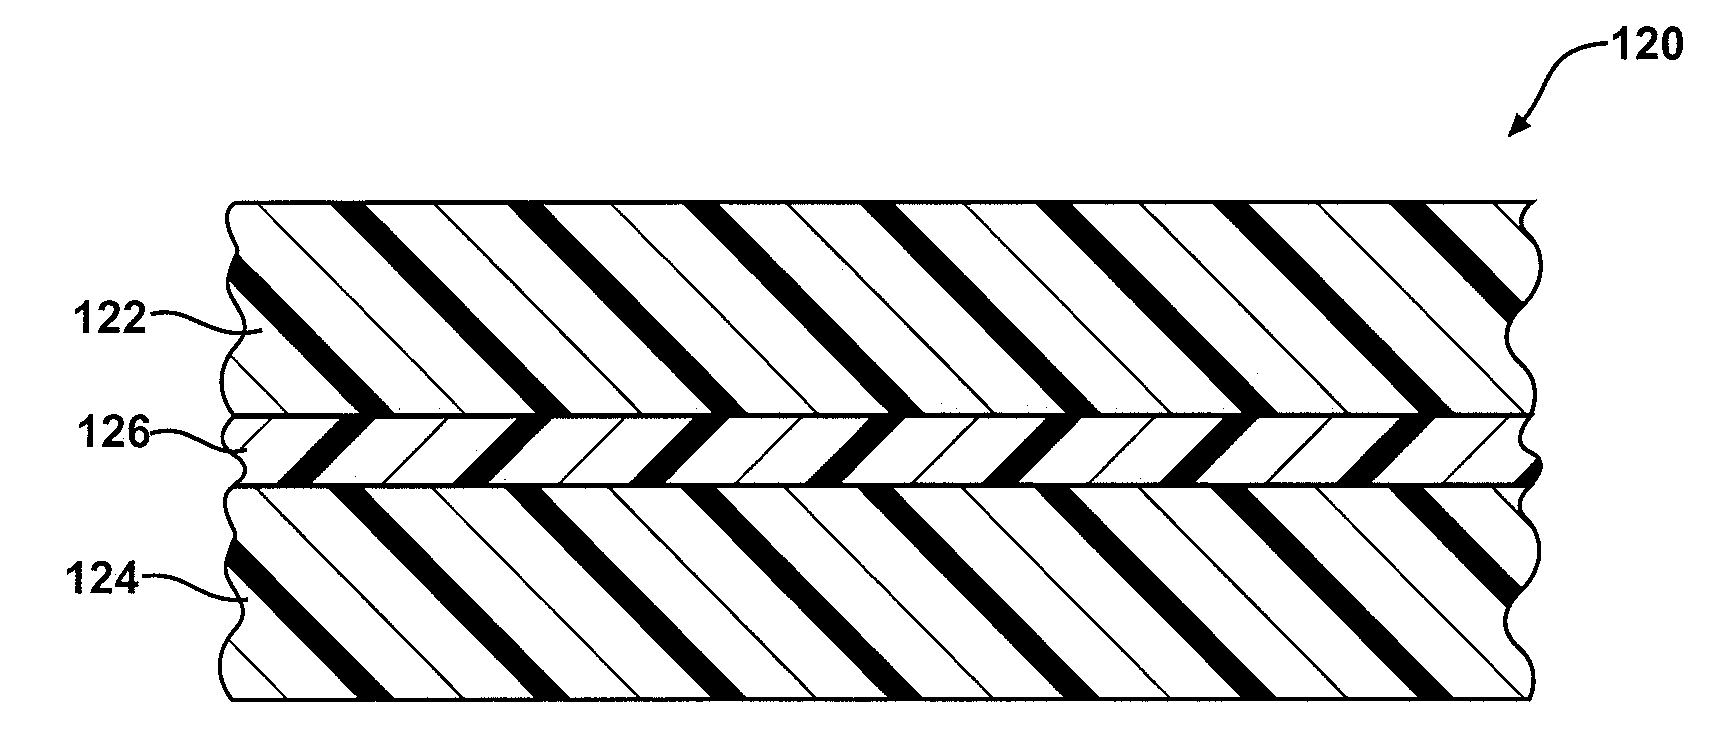 Piezoelectric polymer composite article and system